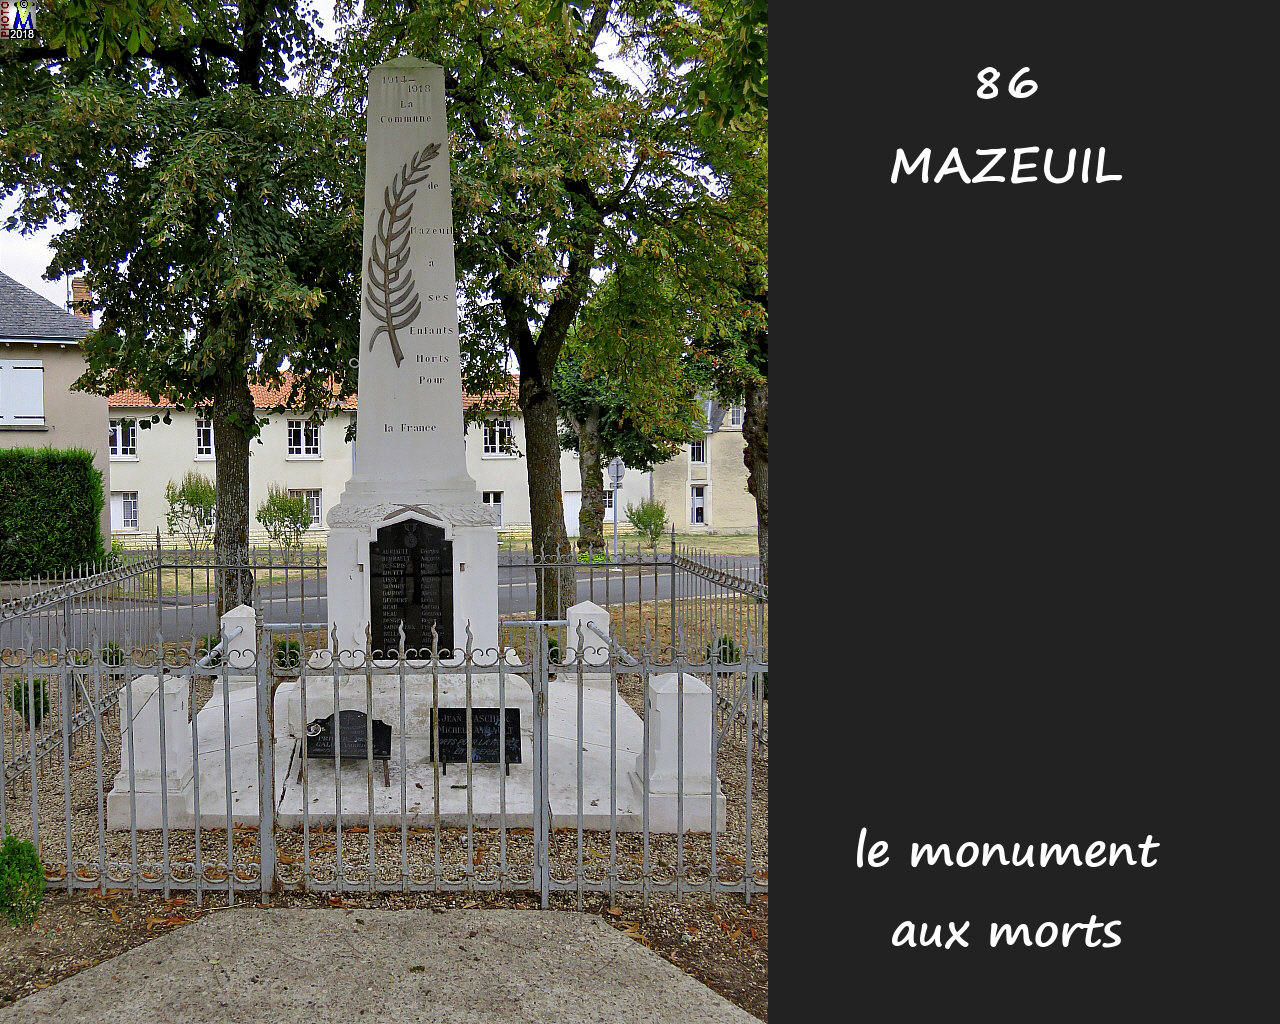 86MAZEUIL_morts_1000.jpg